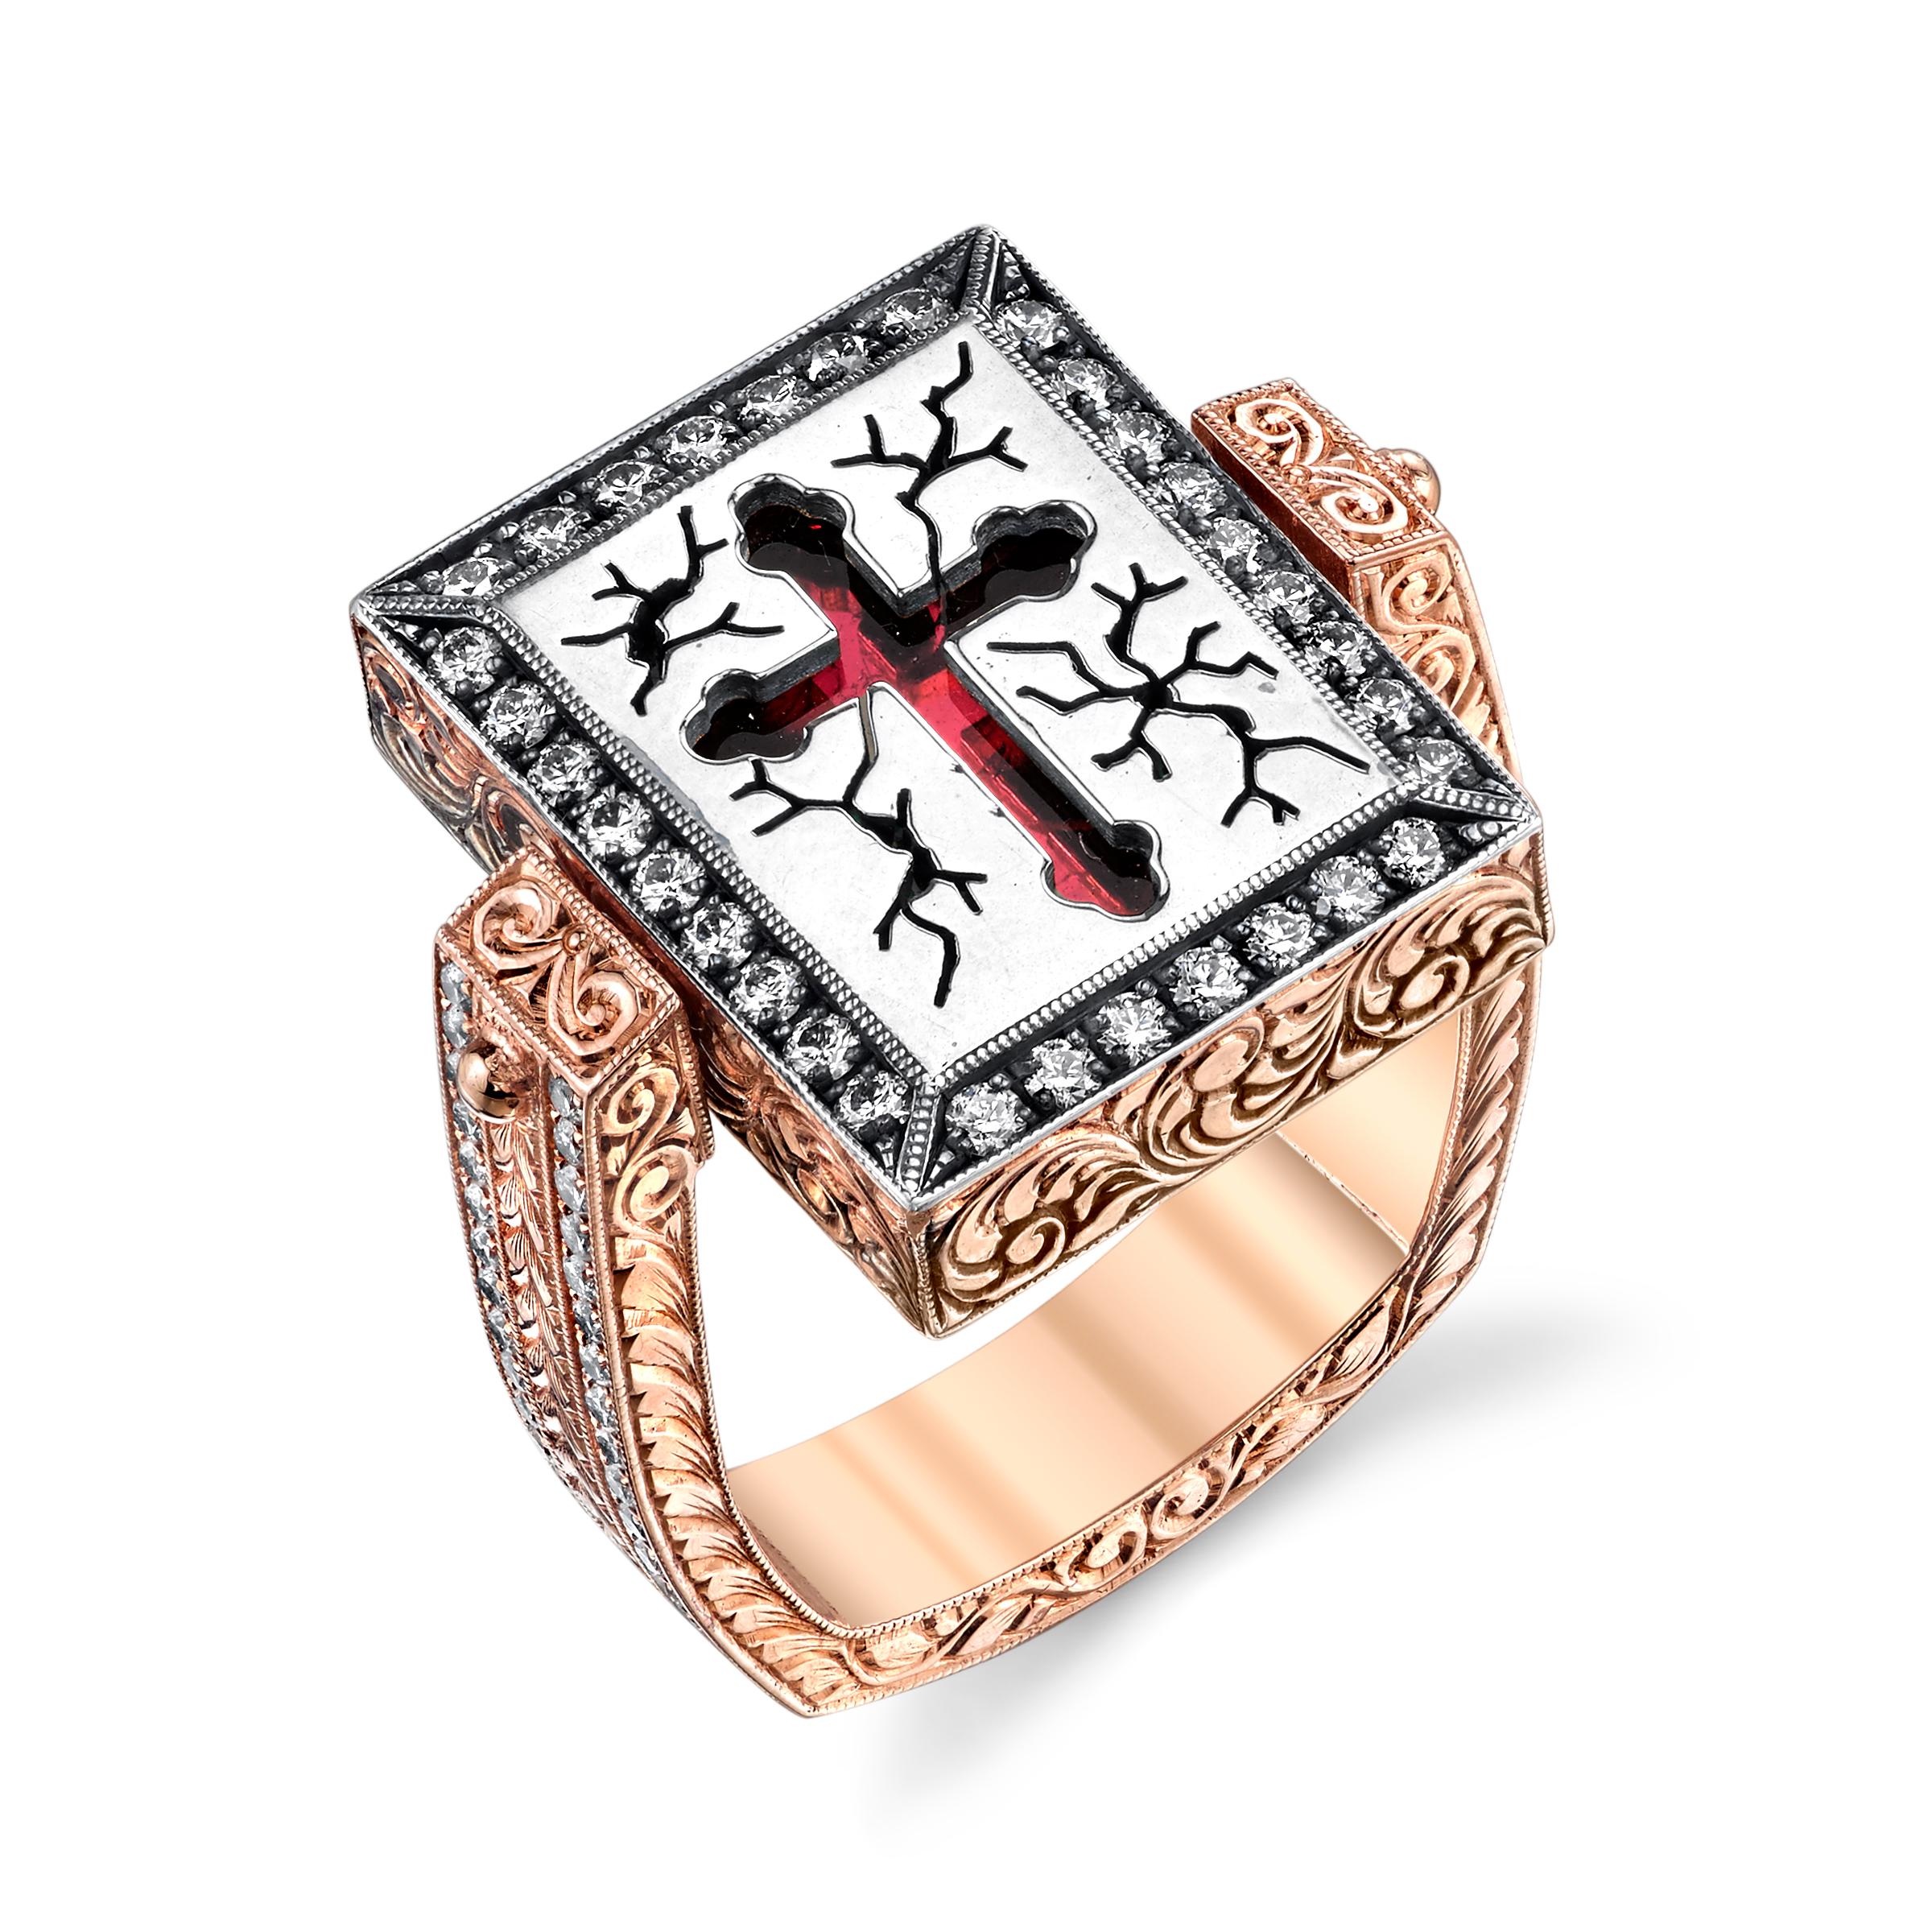 This ring is unlike any you have seen before! It features hand-engraving throughout the design and a unique flip mechanism. Depending on your mood, you can either wear this ring showcasing Rubies and 14 Karat Rose Gold or Organic Silver and